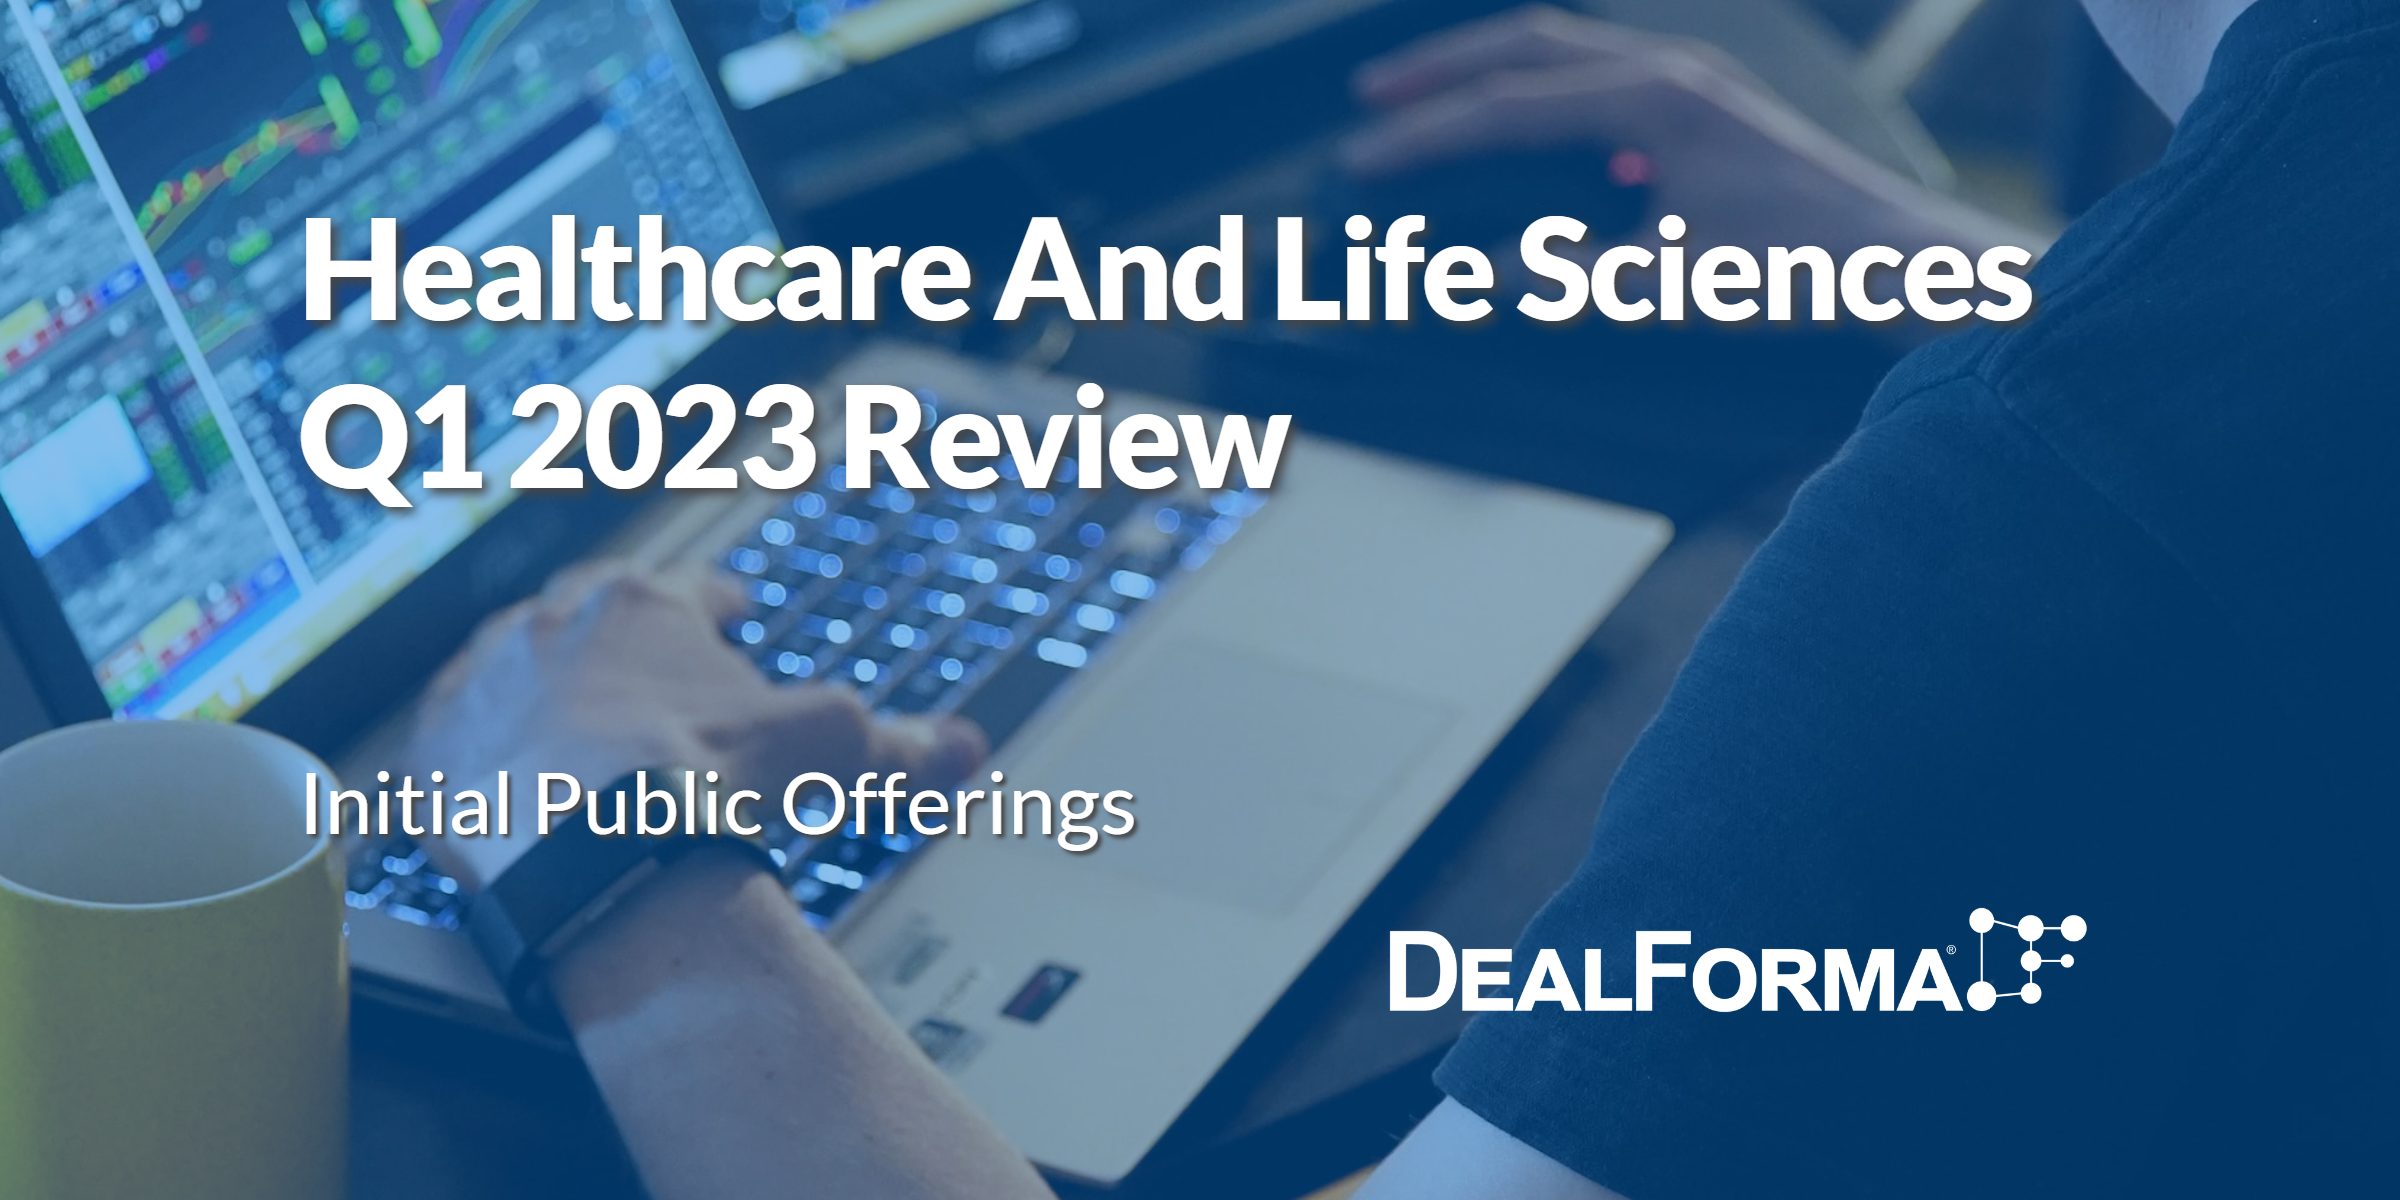 Healthcare And Life Sciences Q1 2023 Review: Initial Public Offerings